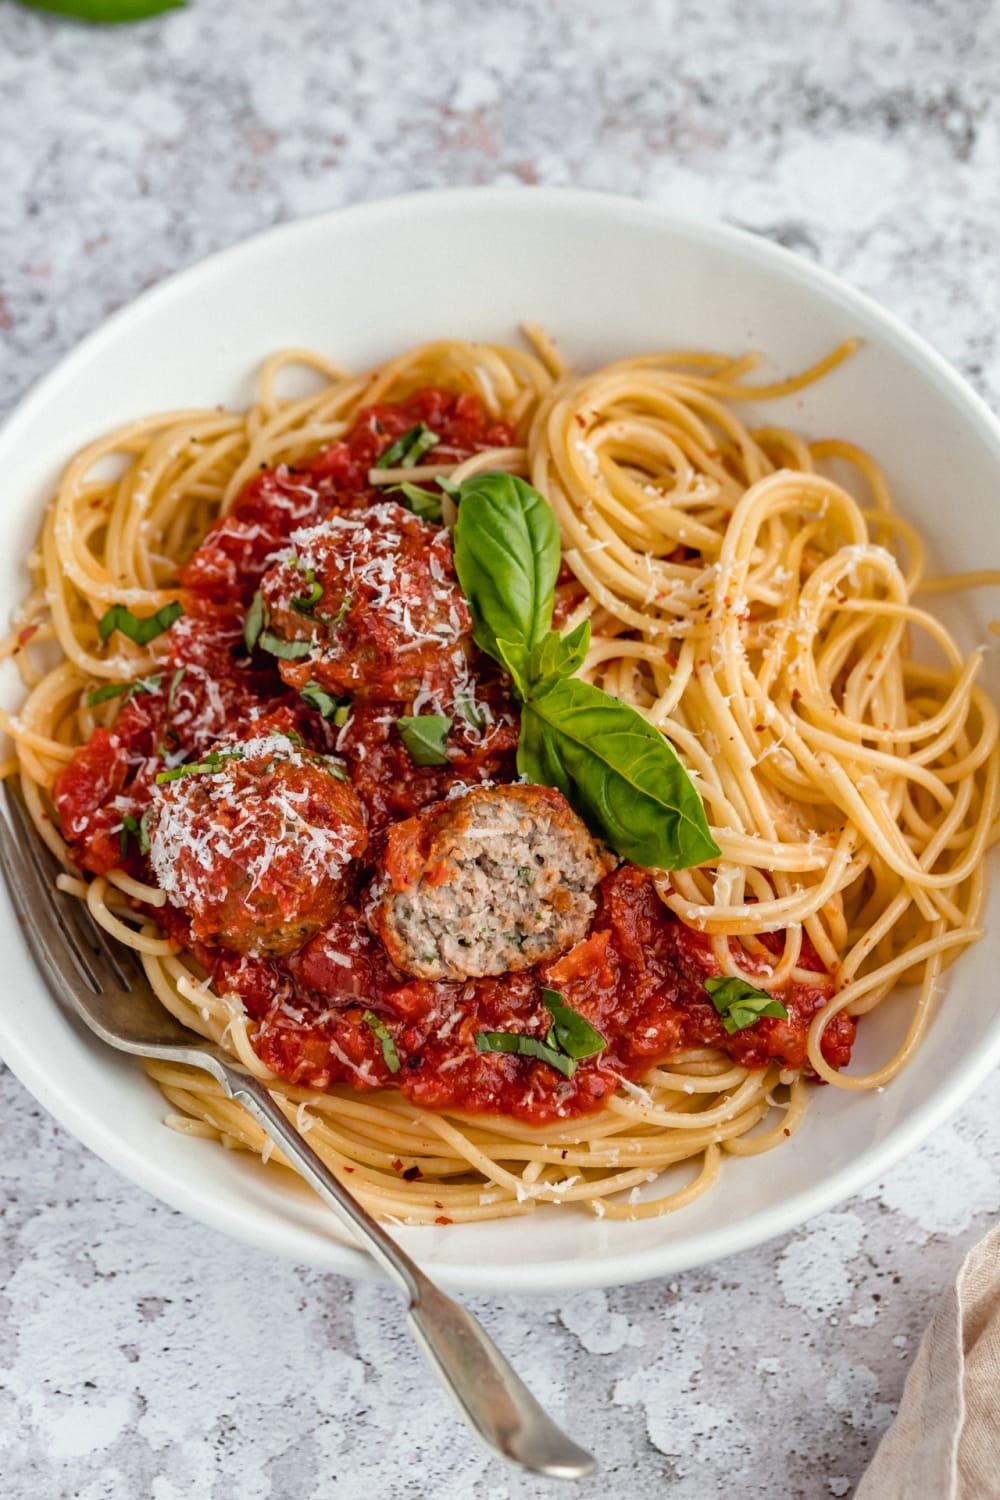 These healthy turkey meatballs are the best!